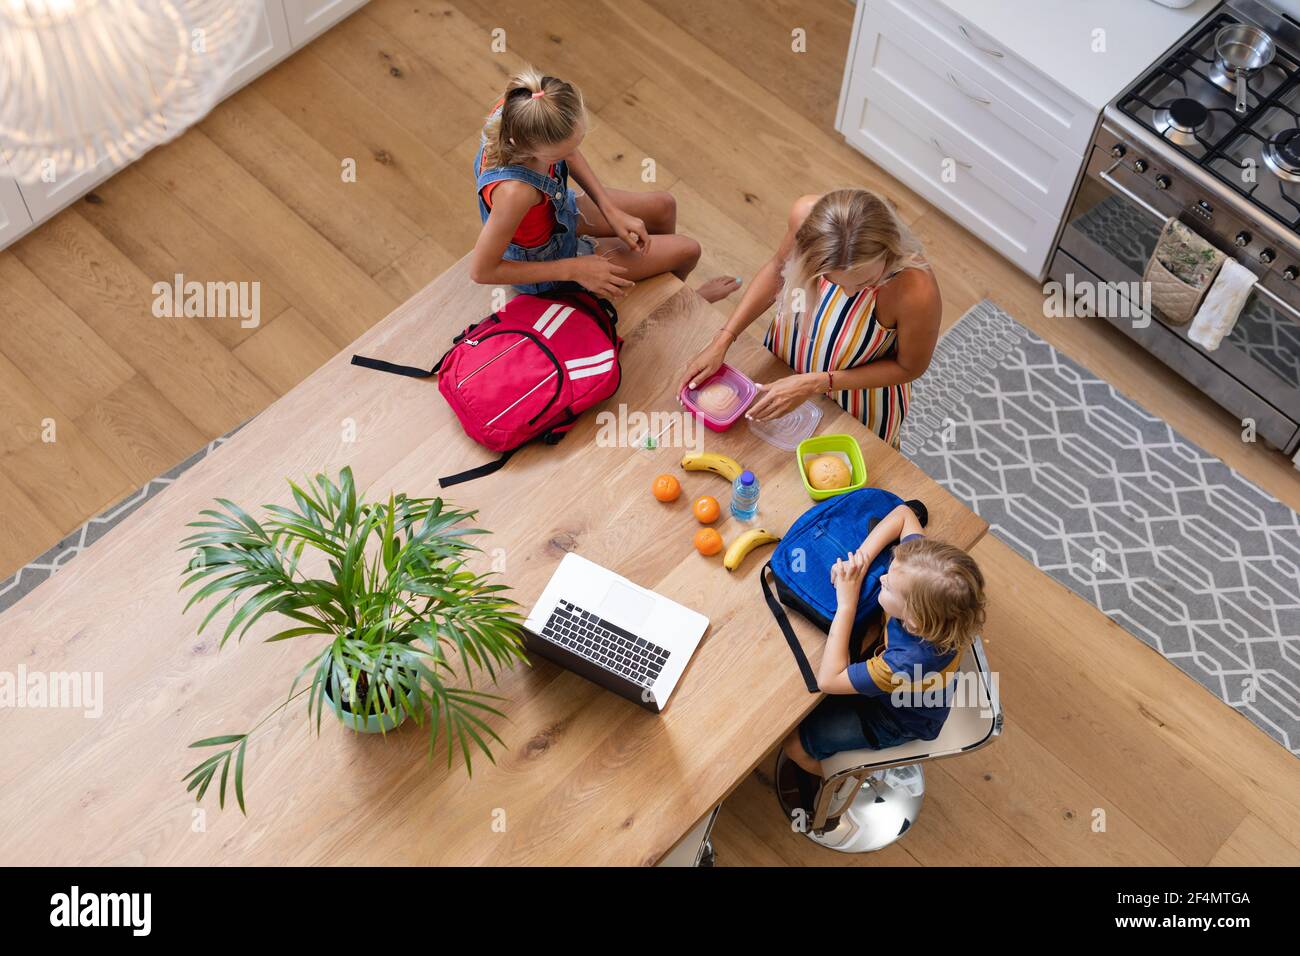 High angle view of caucasian mother with son and daughter preparing packed lunches in kitchen Stock Photo